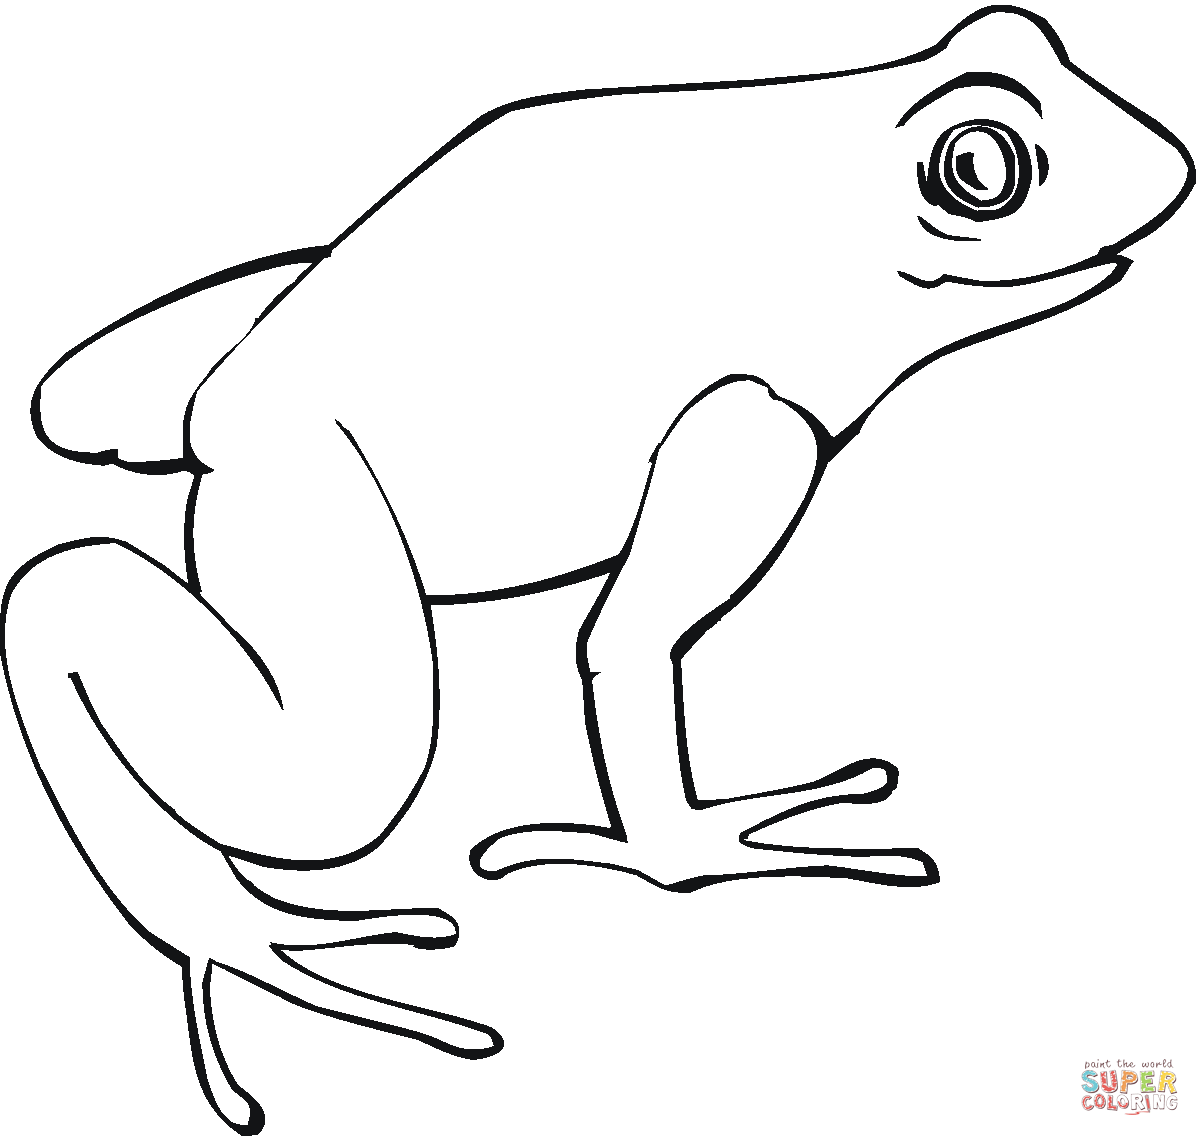 Cute Frog Coloring Page   ClipArt Best